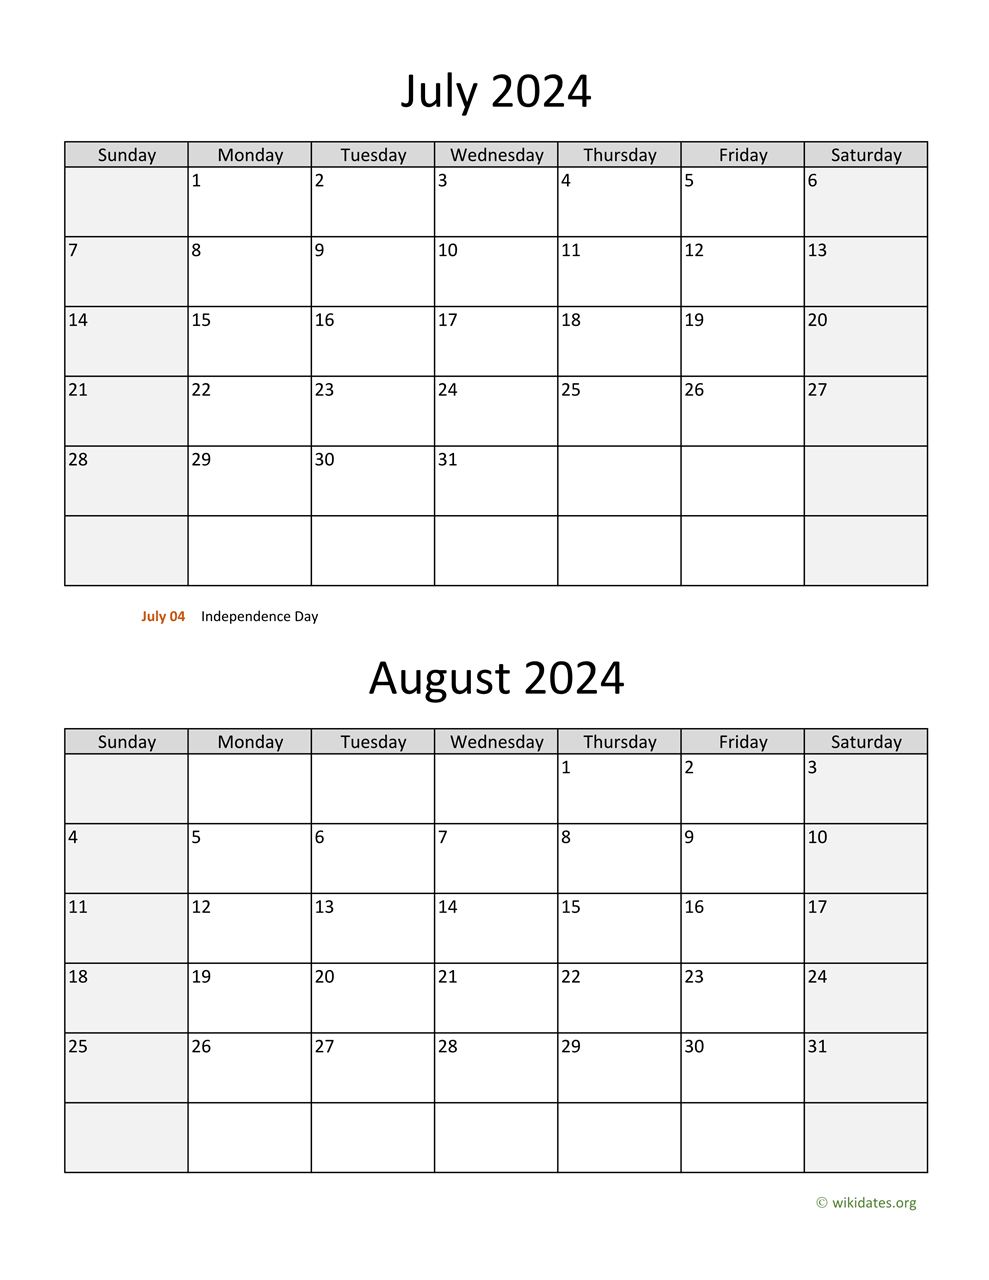 July And August 2024 Calendar | Wikidates for Printable July And August 2024 Calendar